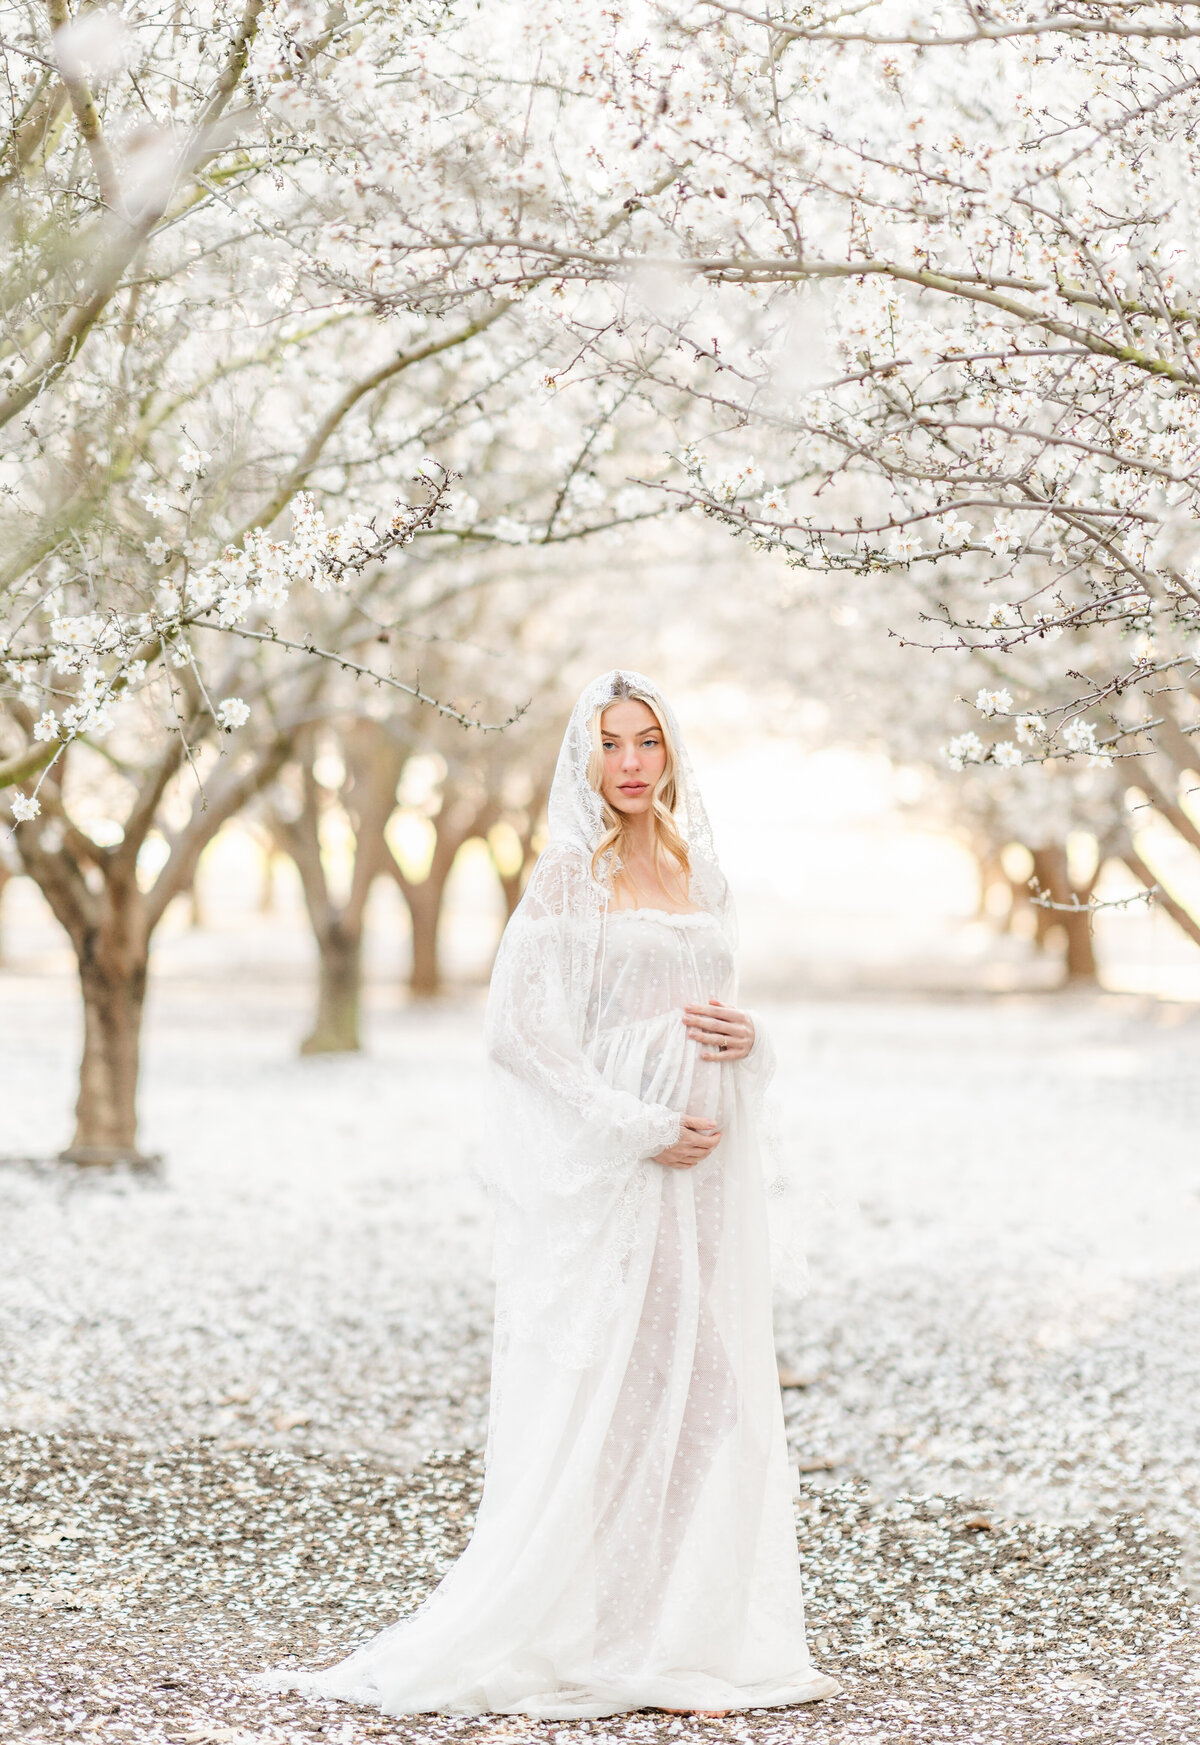 An expecting mother dressed in a white gown and headdress stands in a field of almond blossoms while gently holding her baby bump photographed by Bay area photographer, Light Livin Photography.